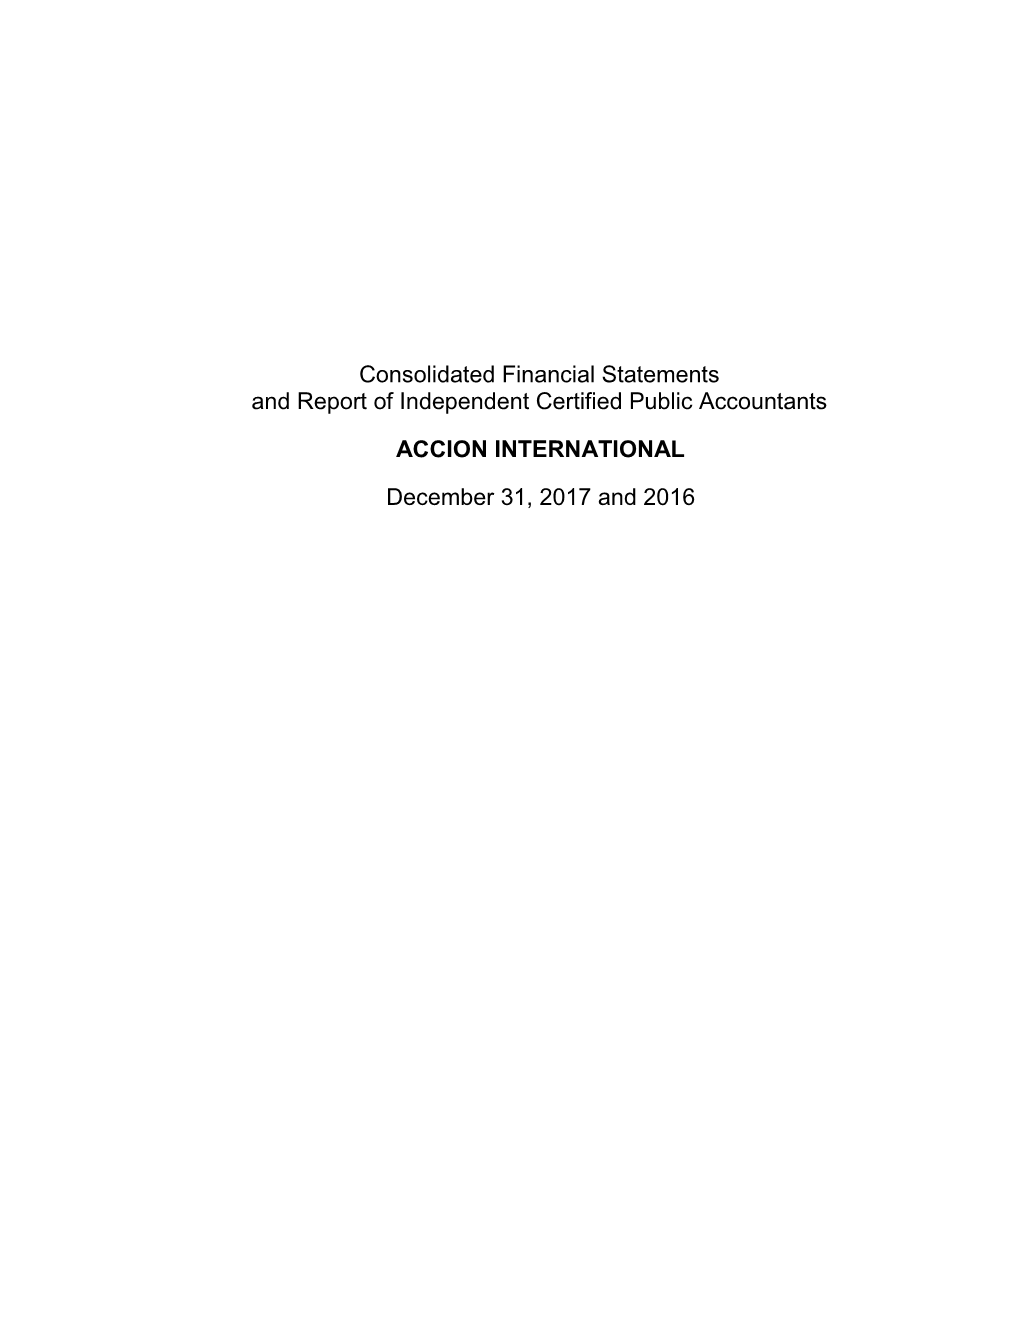 Financial Statements and Report of Independent Certified Public Accountants